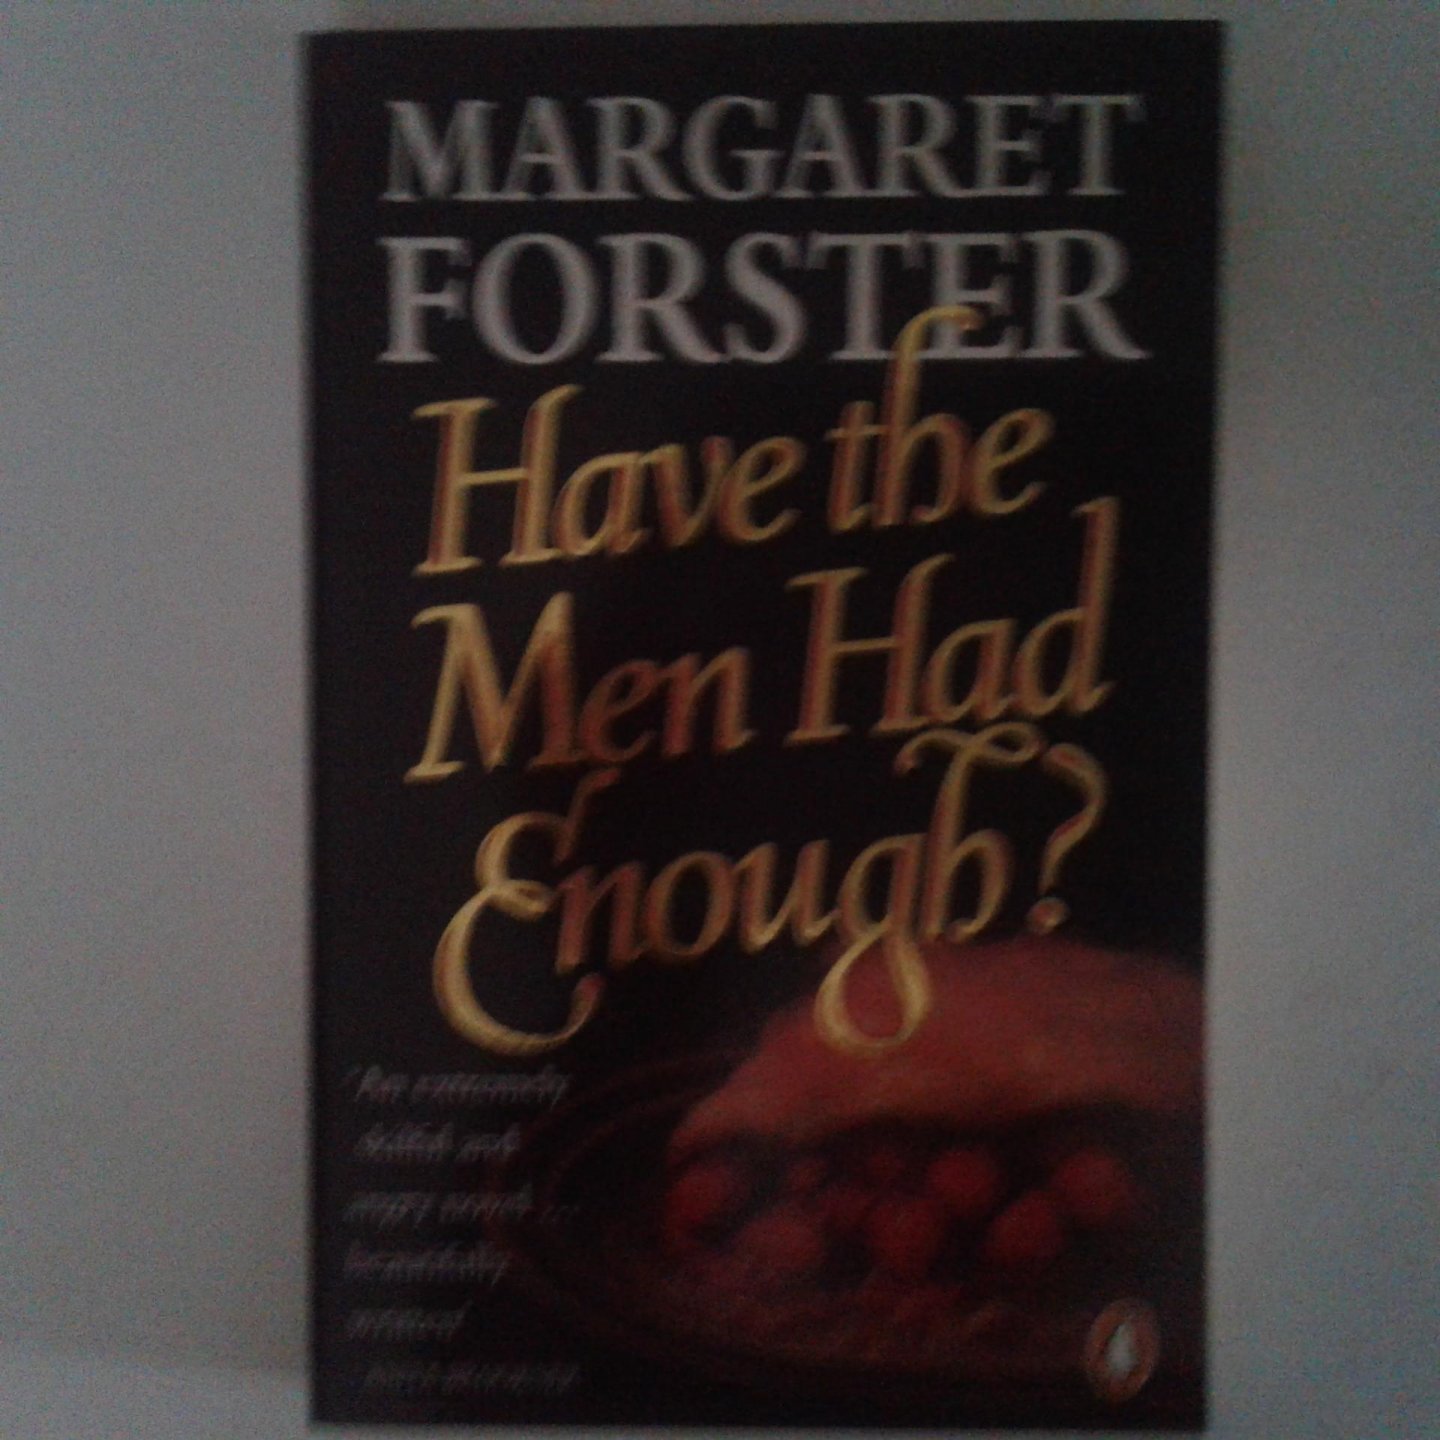 Forster, Mararet - Have the Men had Enough?